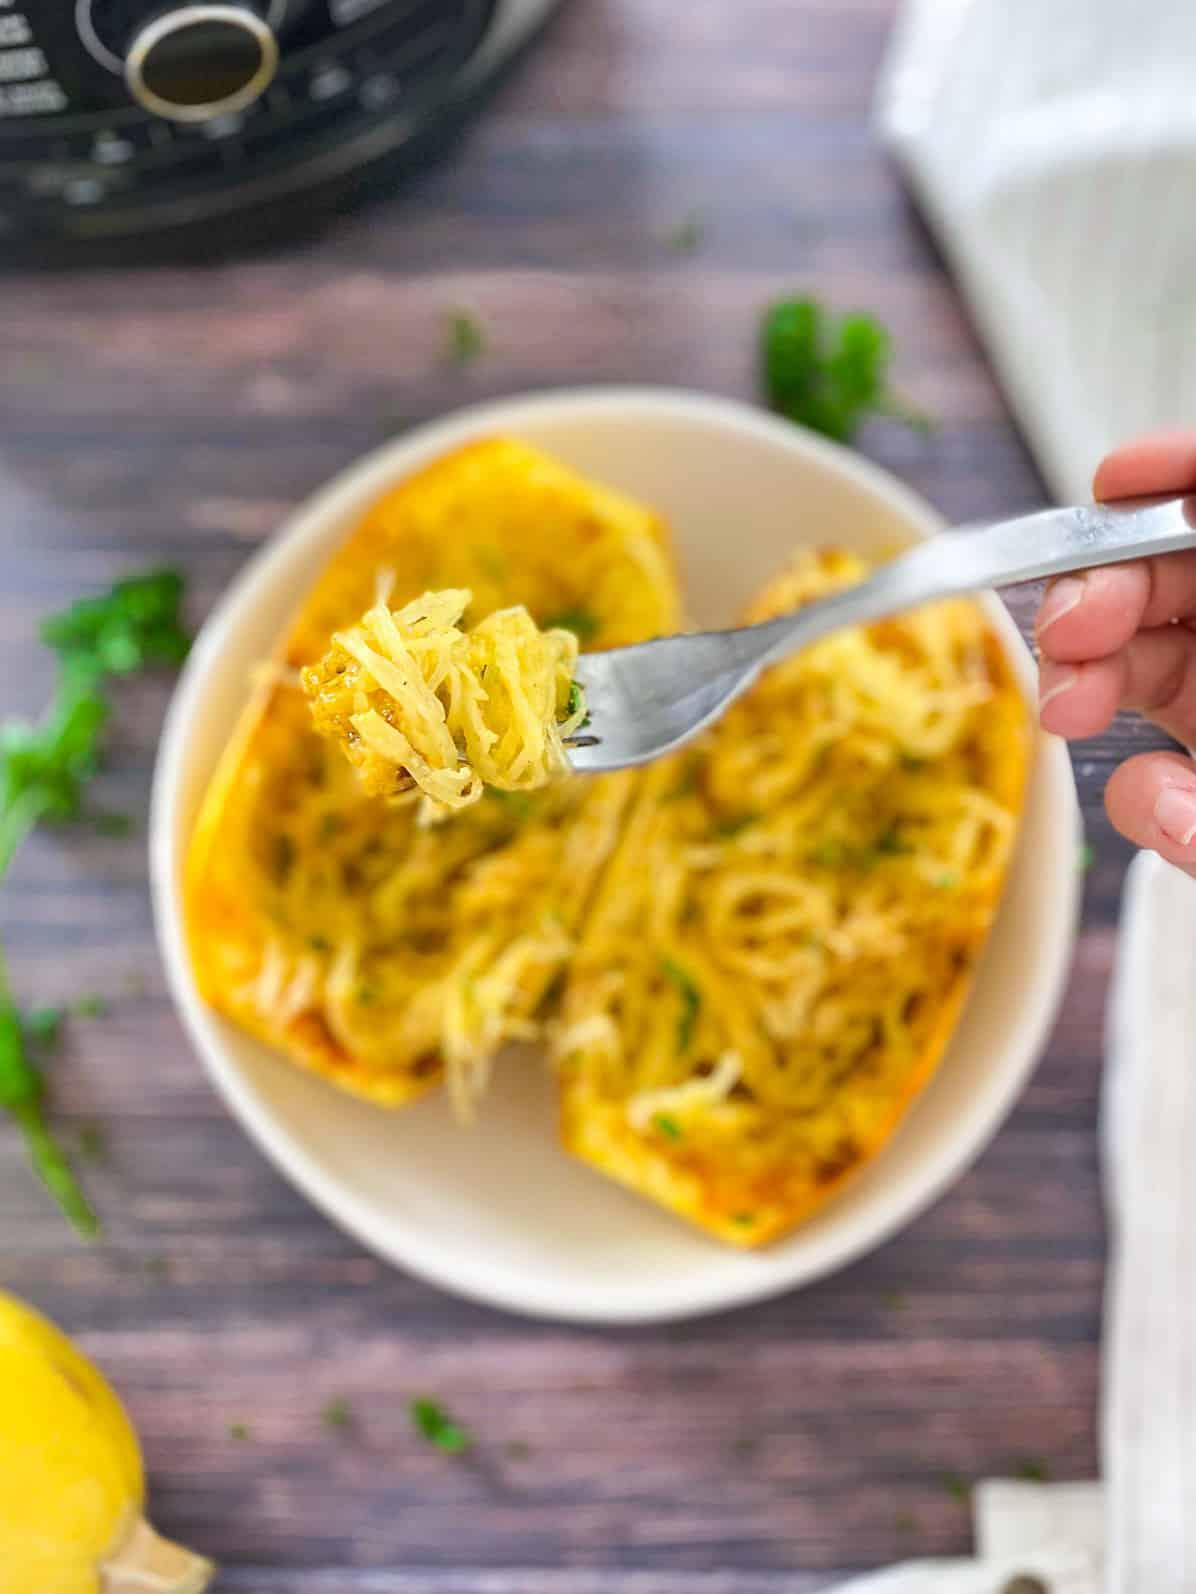 Fork full of spaghetti squash with halved spaghetti squash in a bowl below and air fryer in the background.